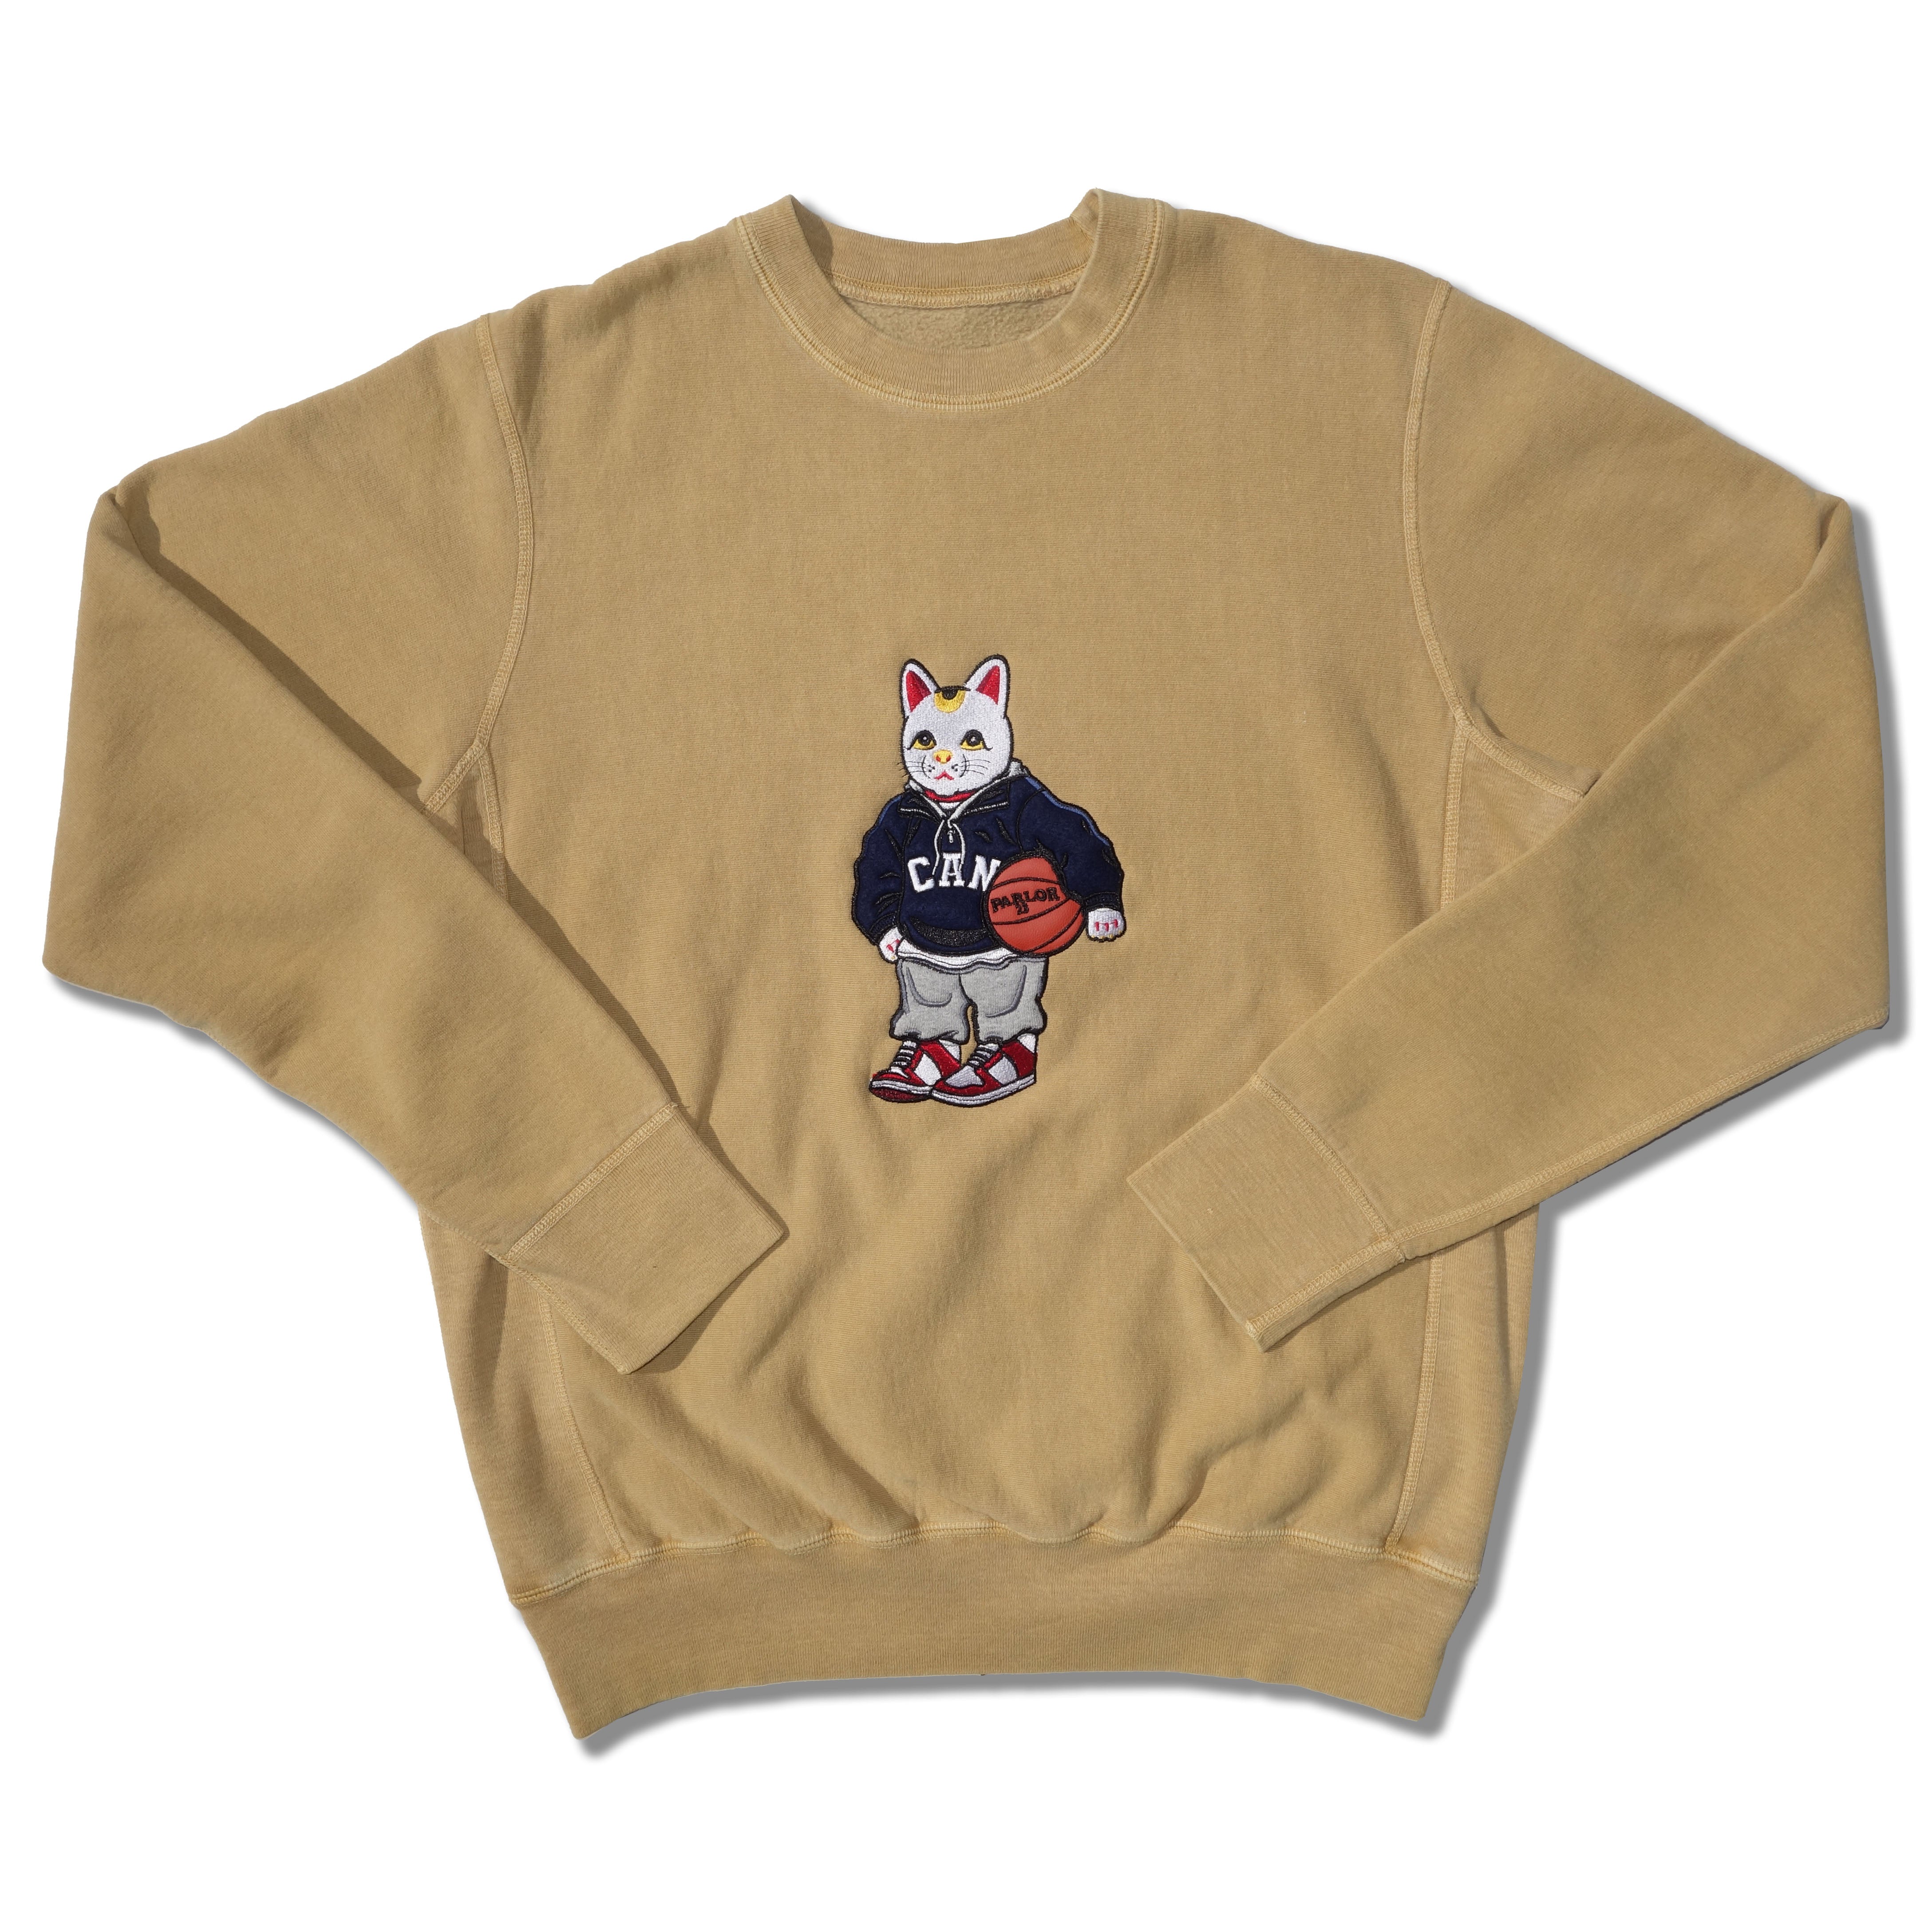 Parlor 23 Made In Canada "PRLR SPORT" Crewneck